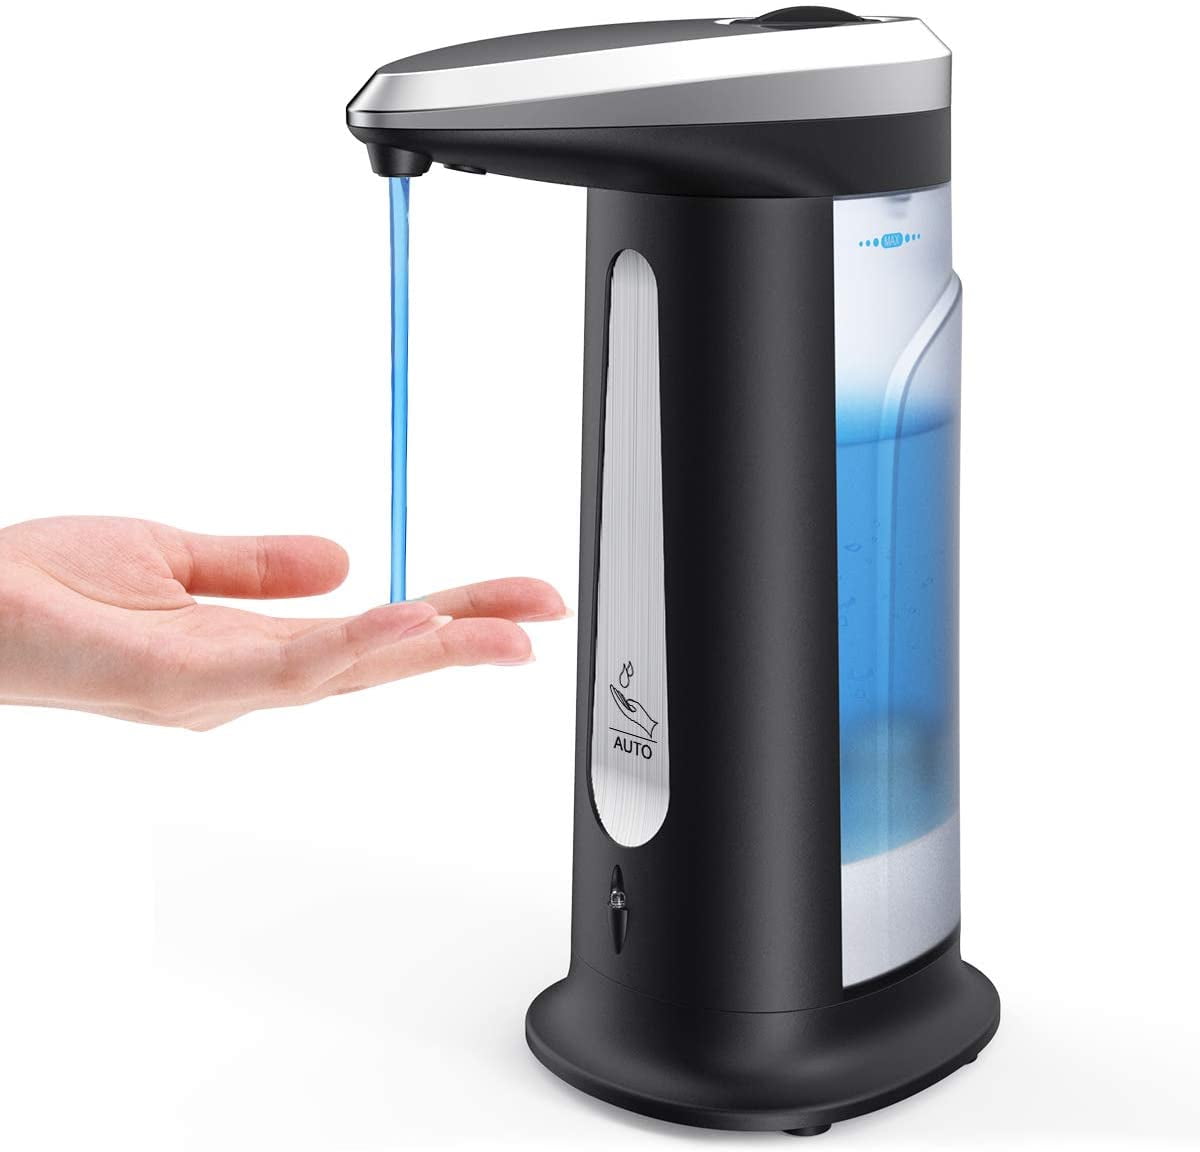 Automatic Spray Touchless Alcohol Sanitizer Dispenser Infrared ABS & PC 